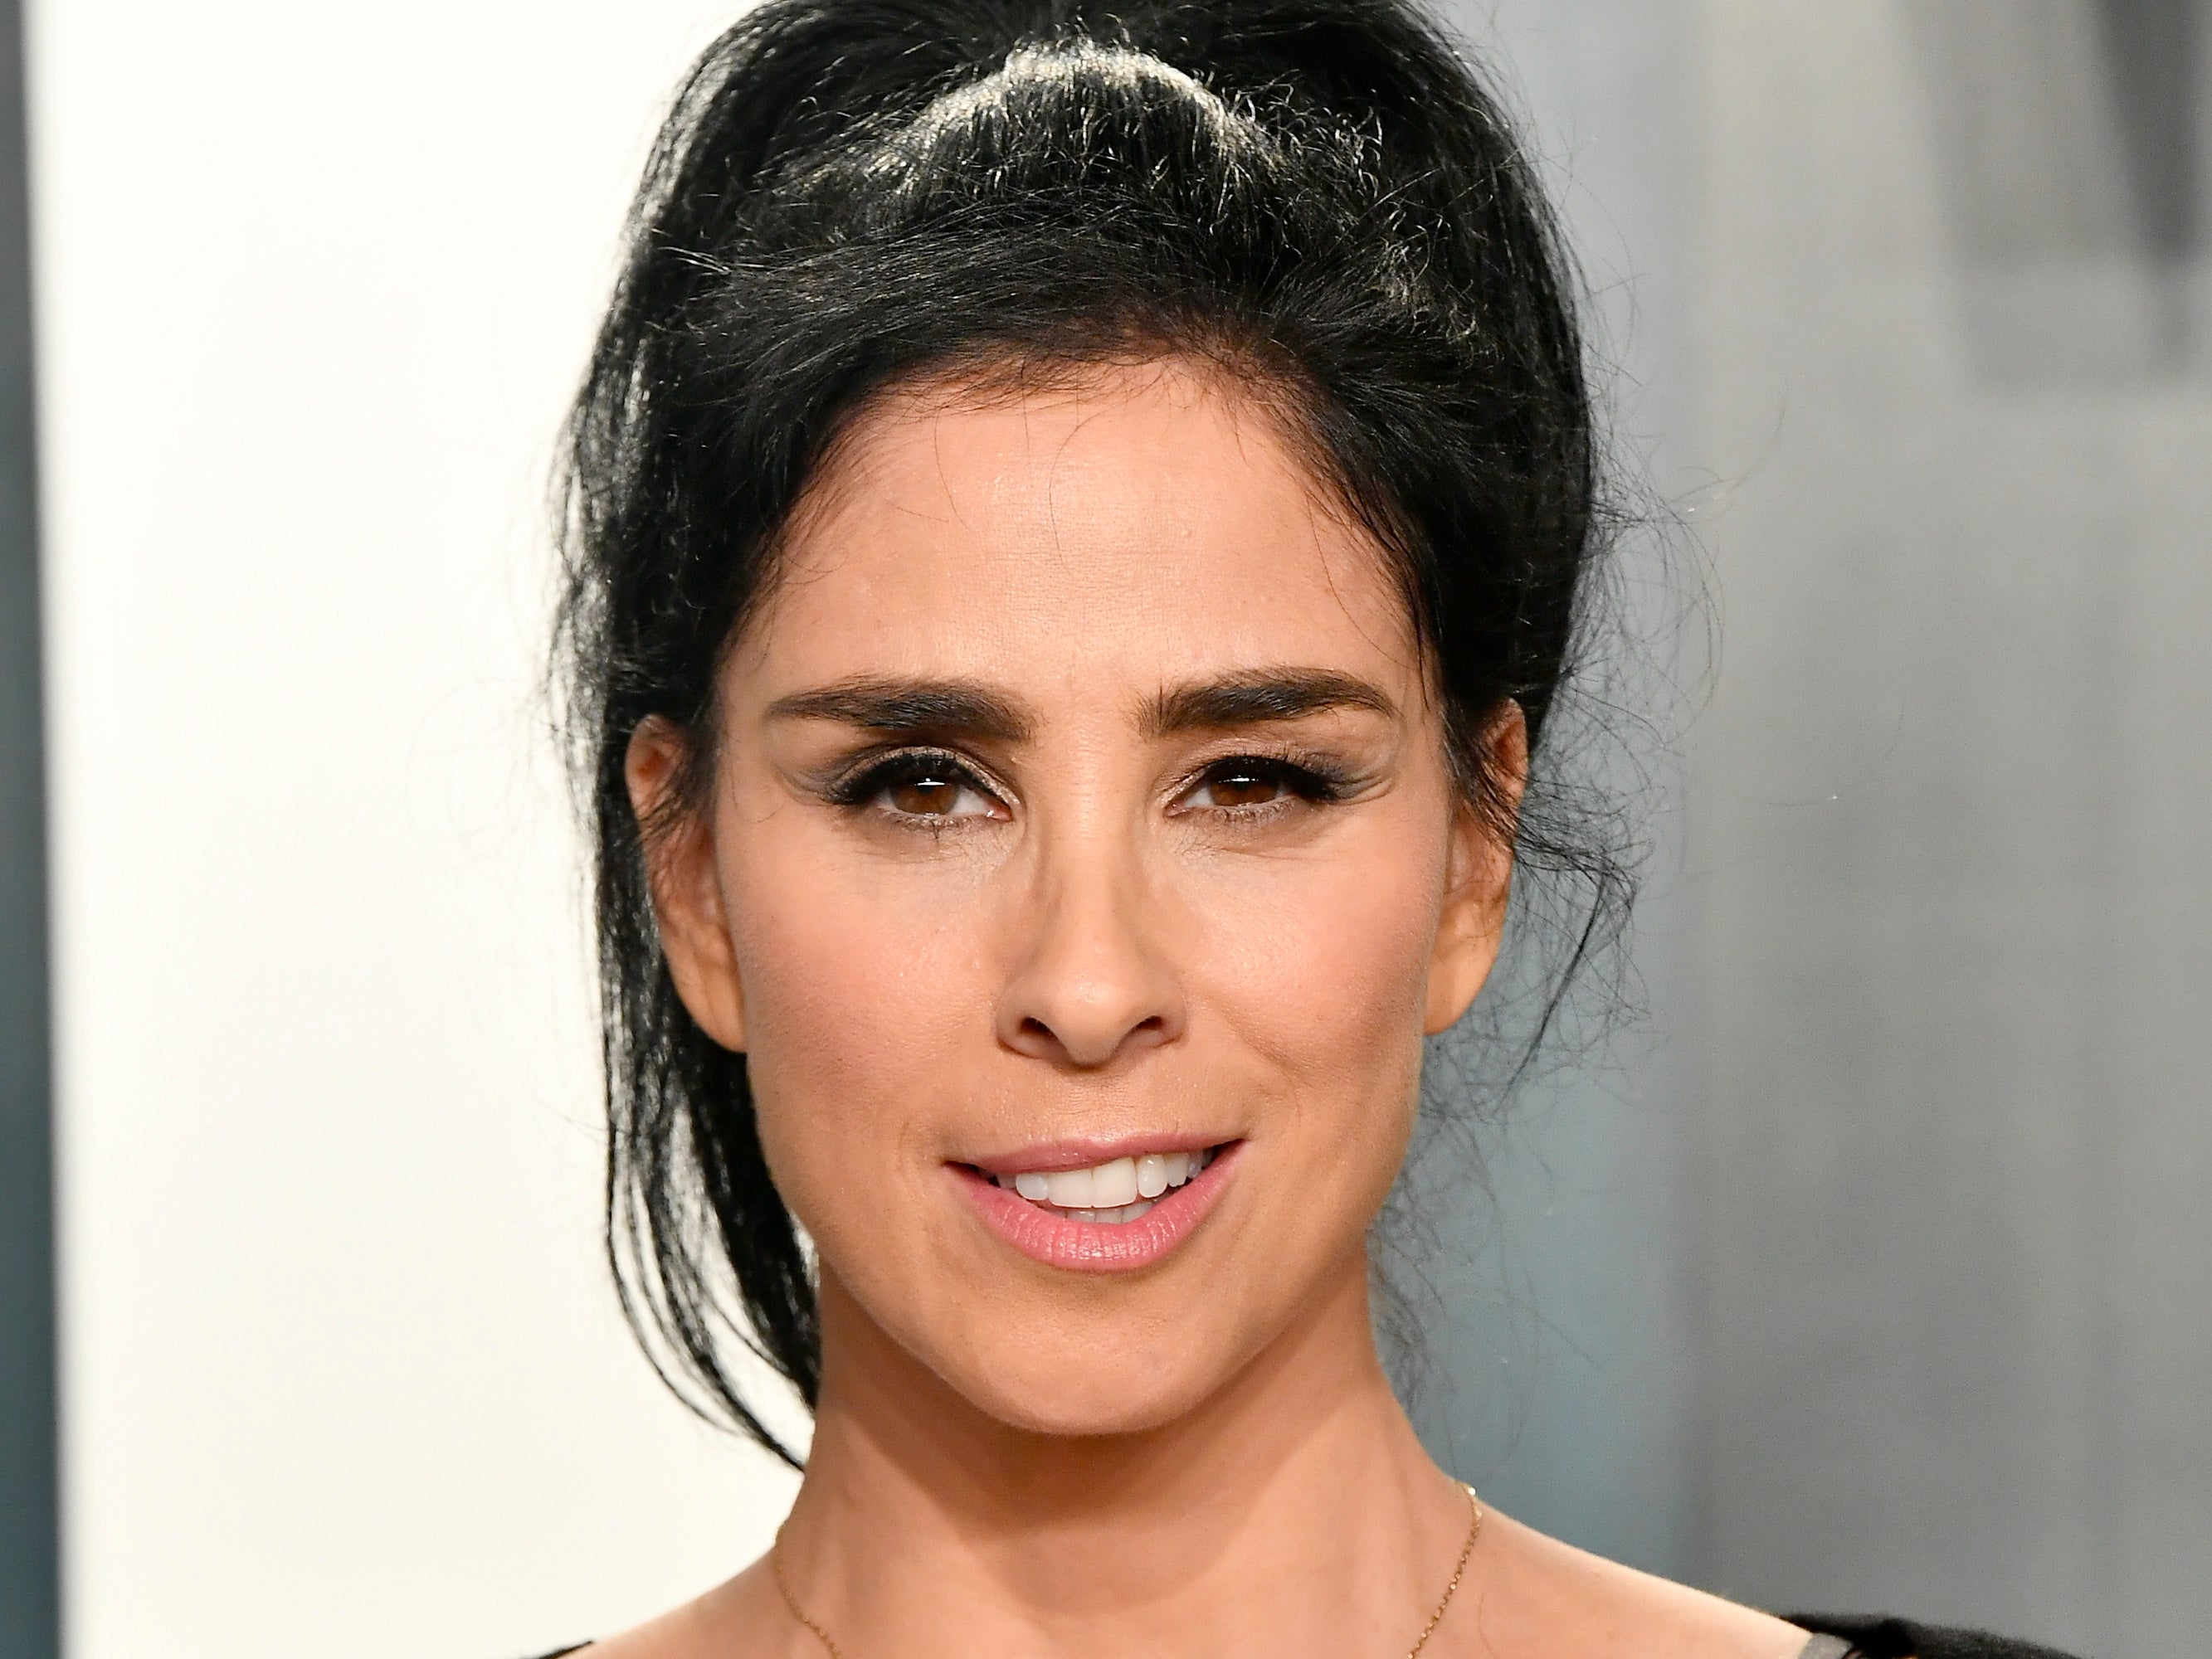 Sarah Silverman pictured in February 2020